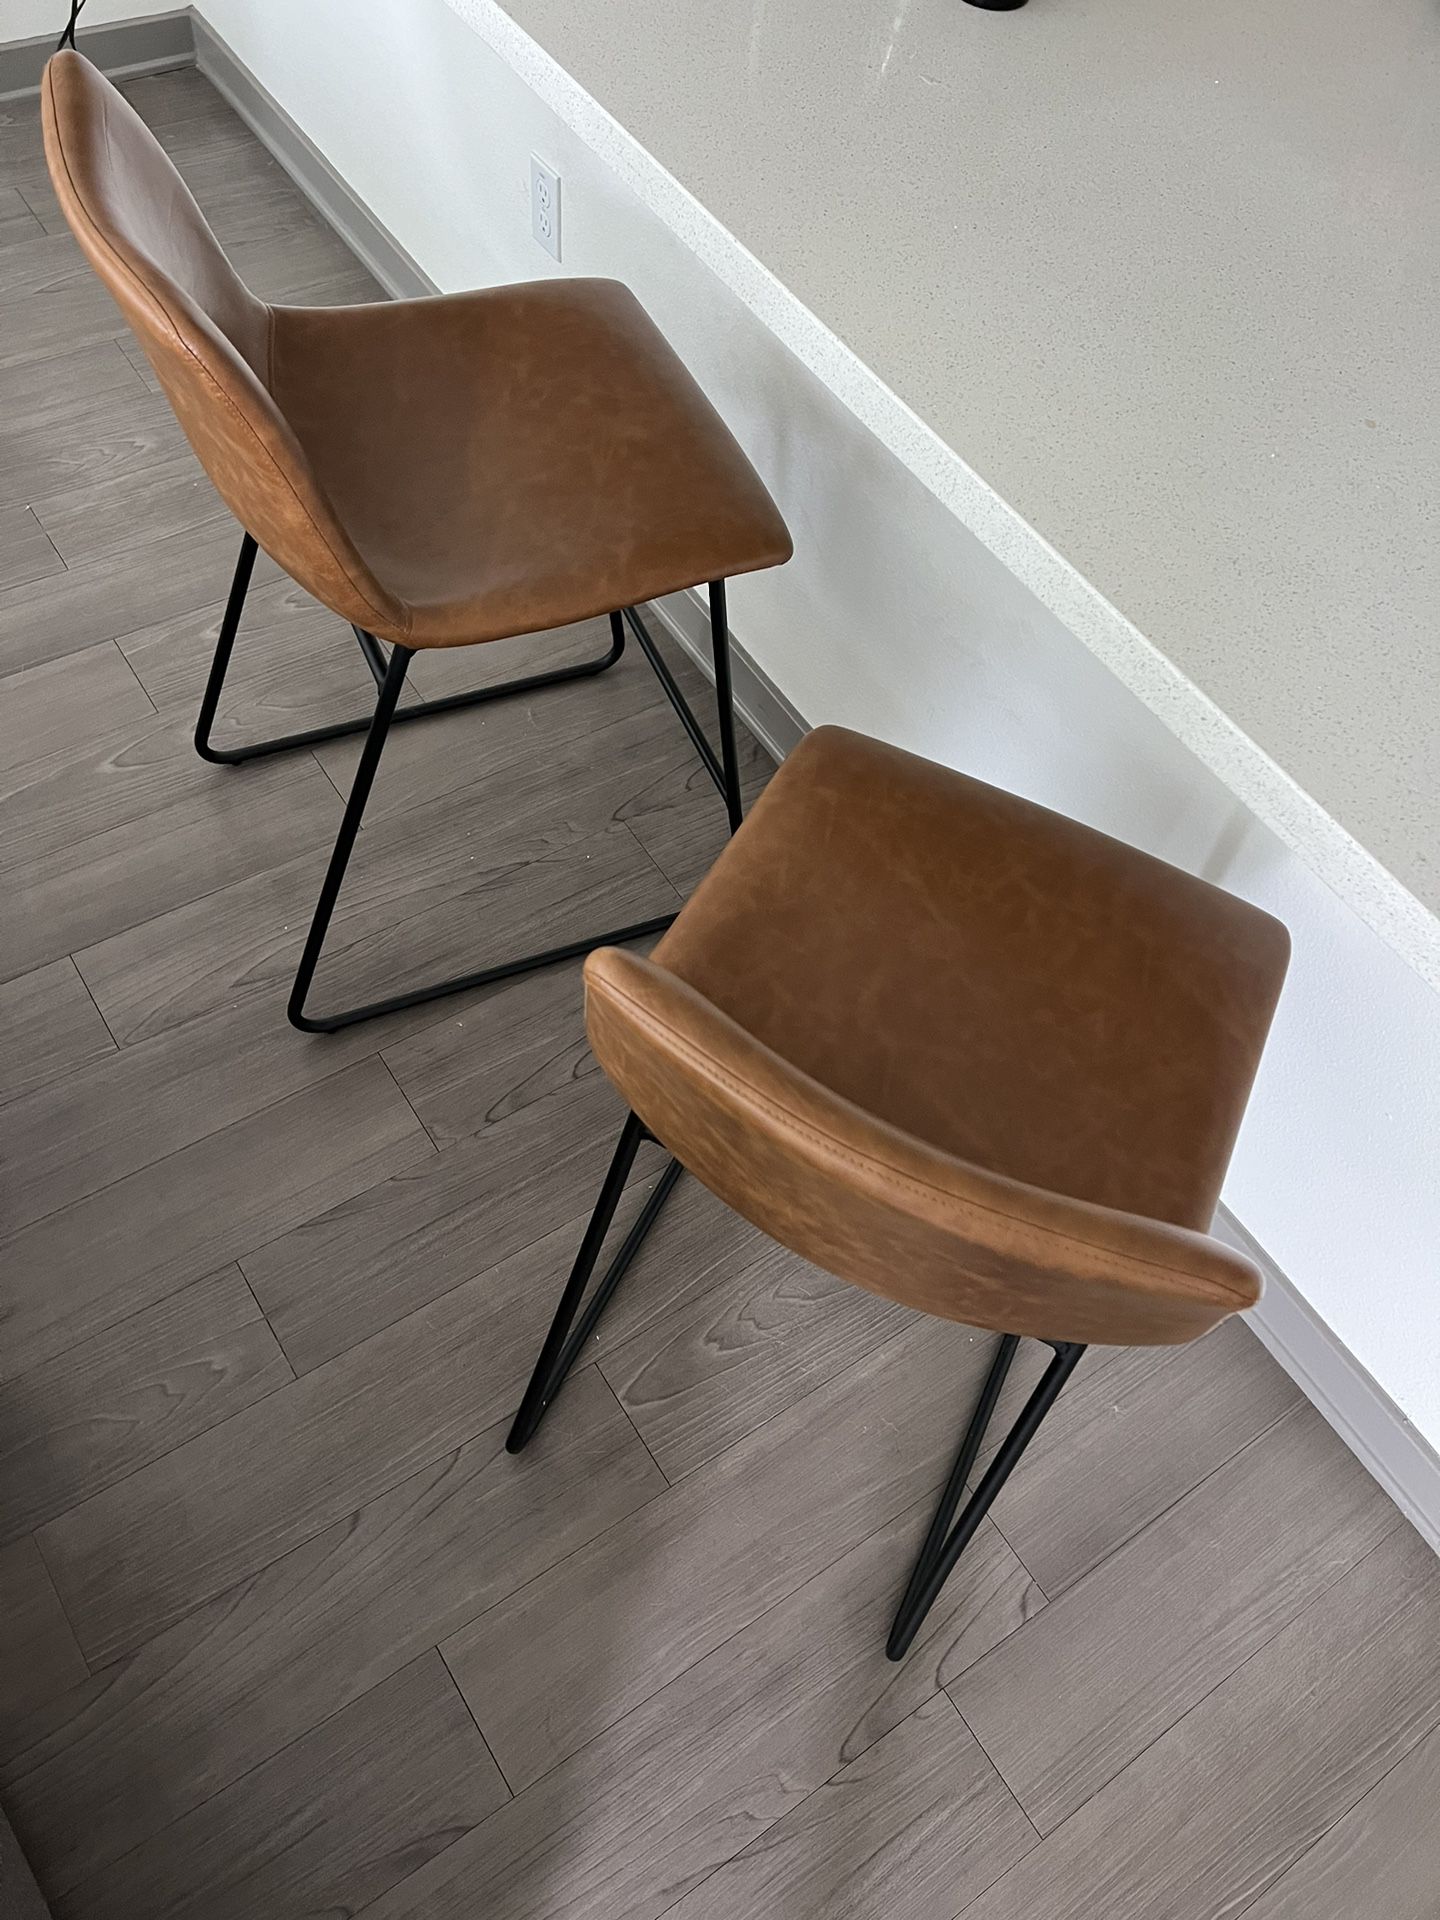 Chairs, Tables